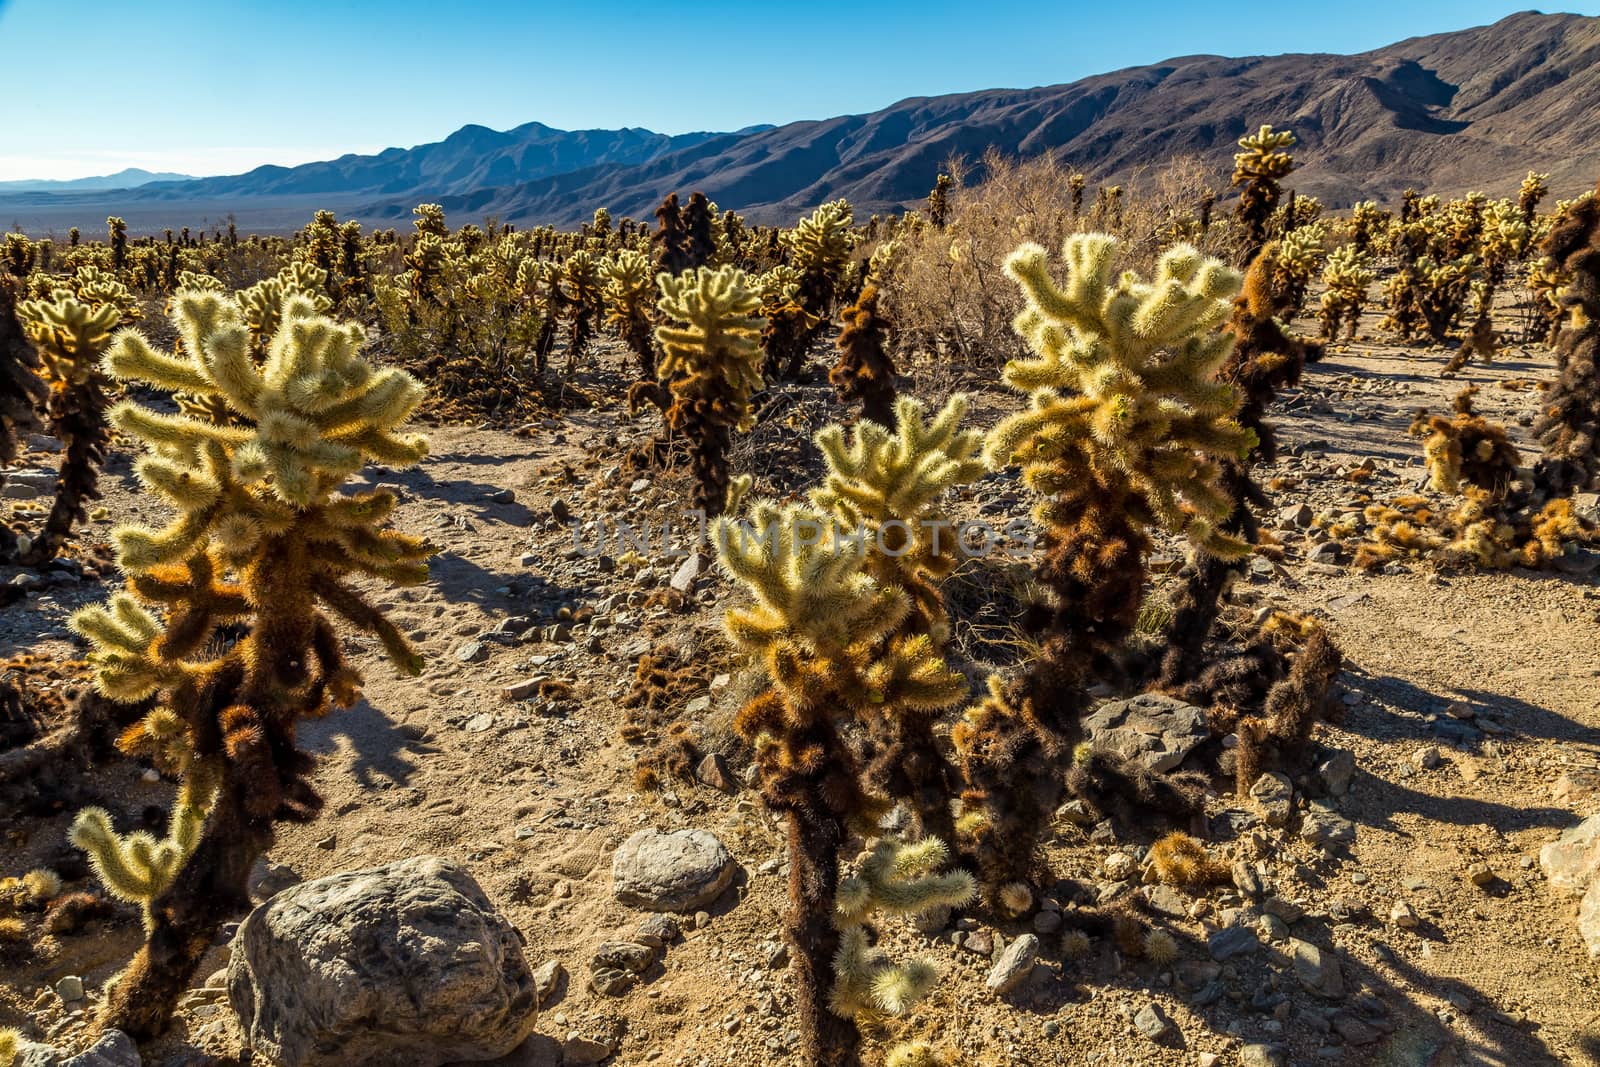 Jumping Cholla Cactus by adifferentbrian